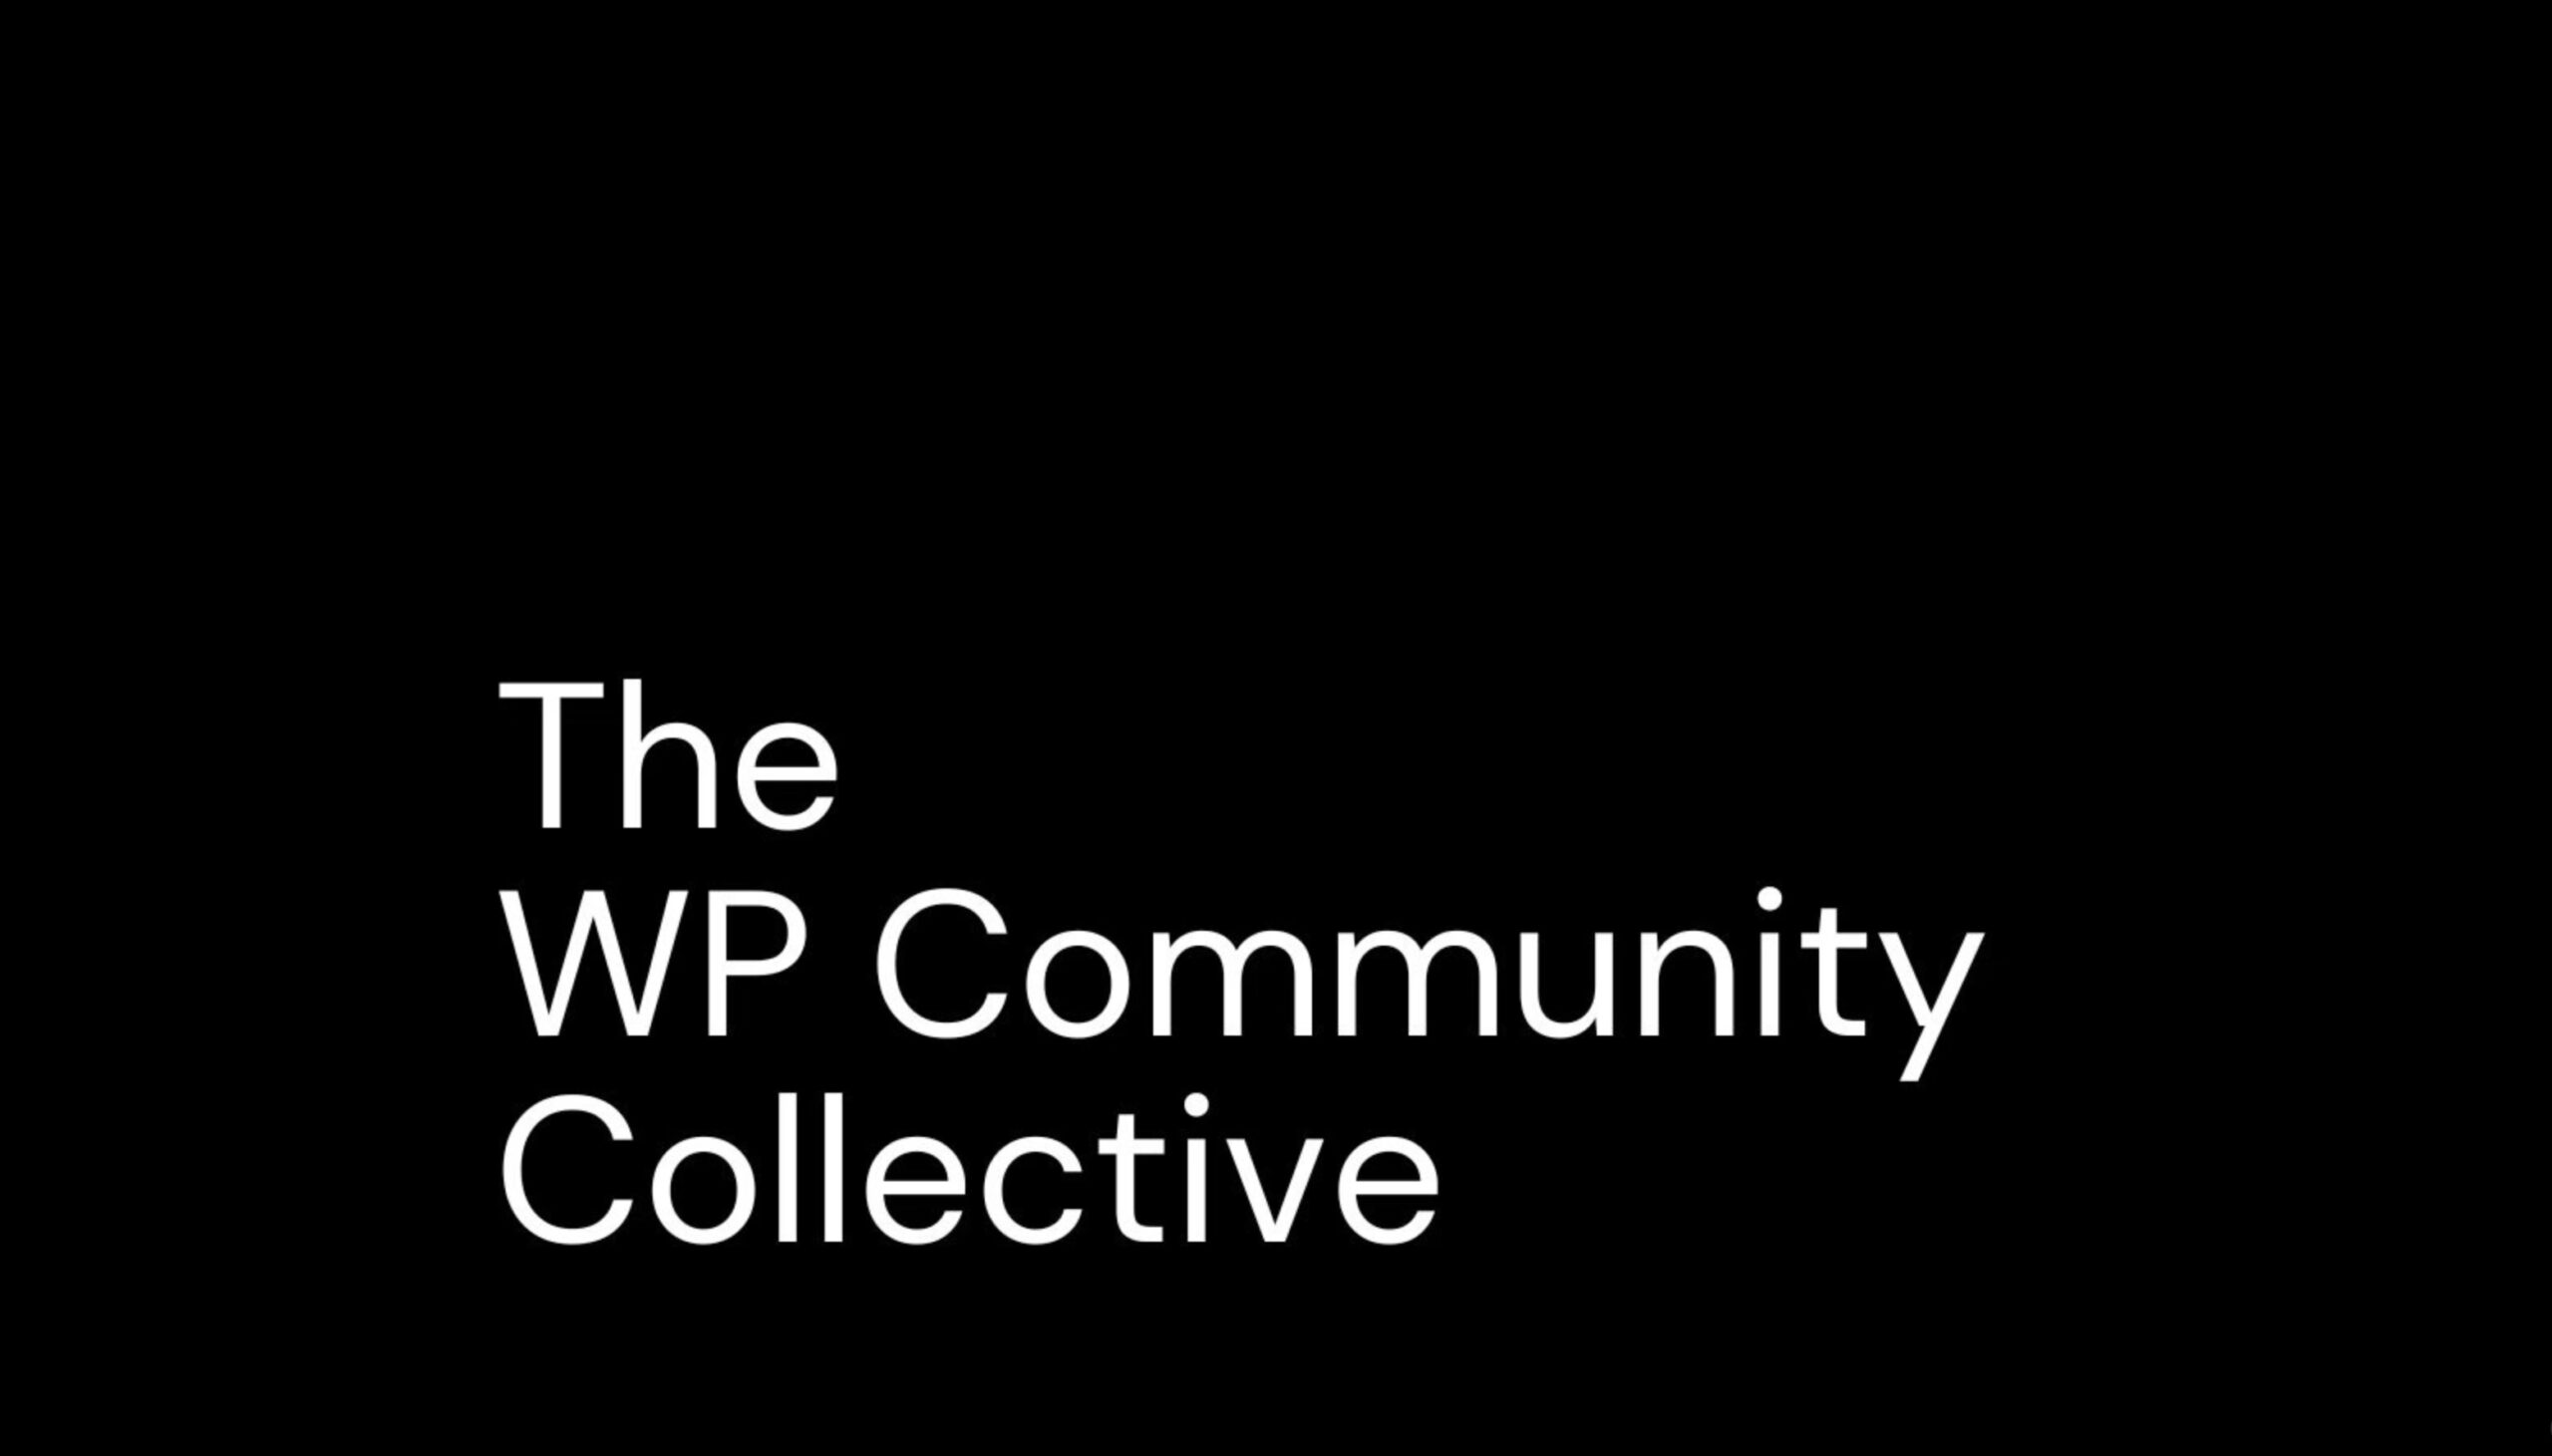 PRESS RELEASE: The WP Community Collective Announces First Cohort for Incentivizing DEIB in WP